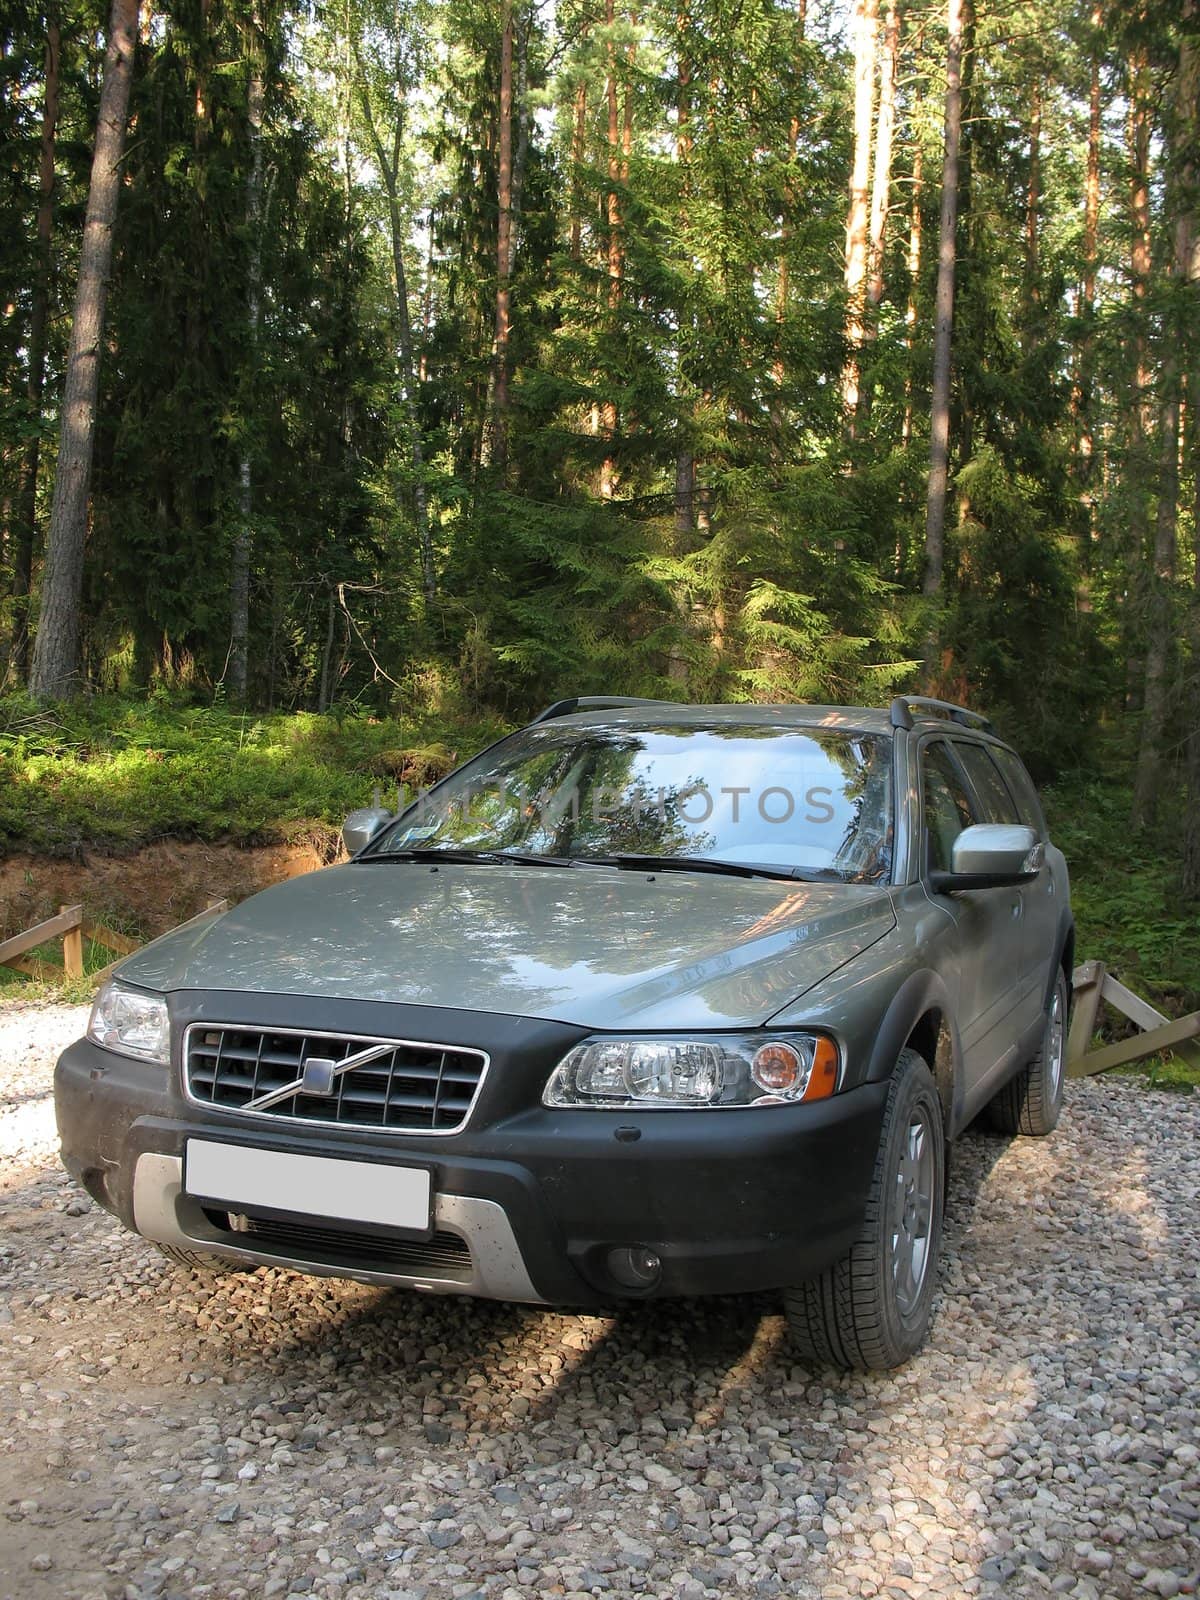 4x4 European wagon parked on a forest. by julien